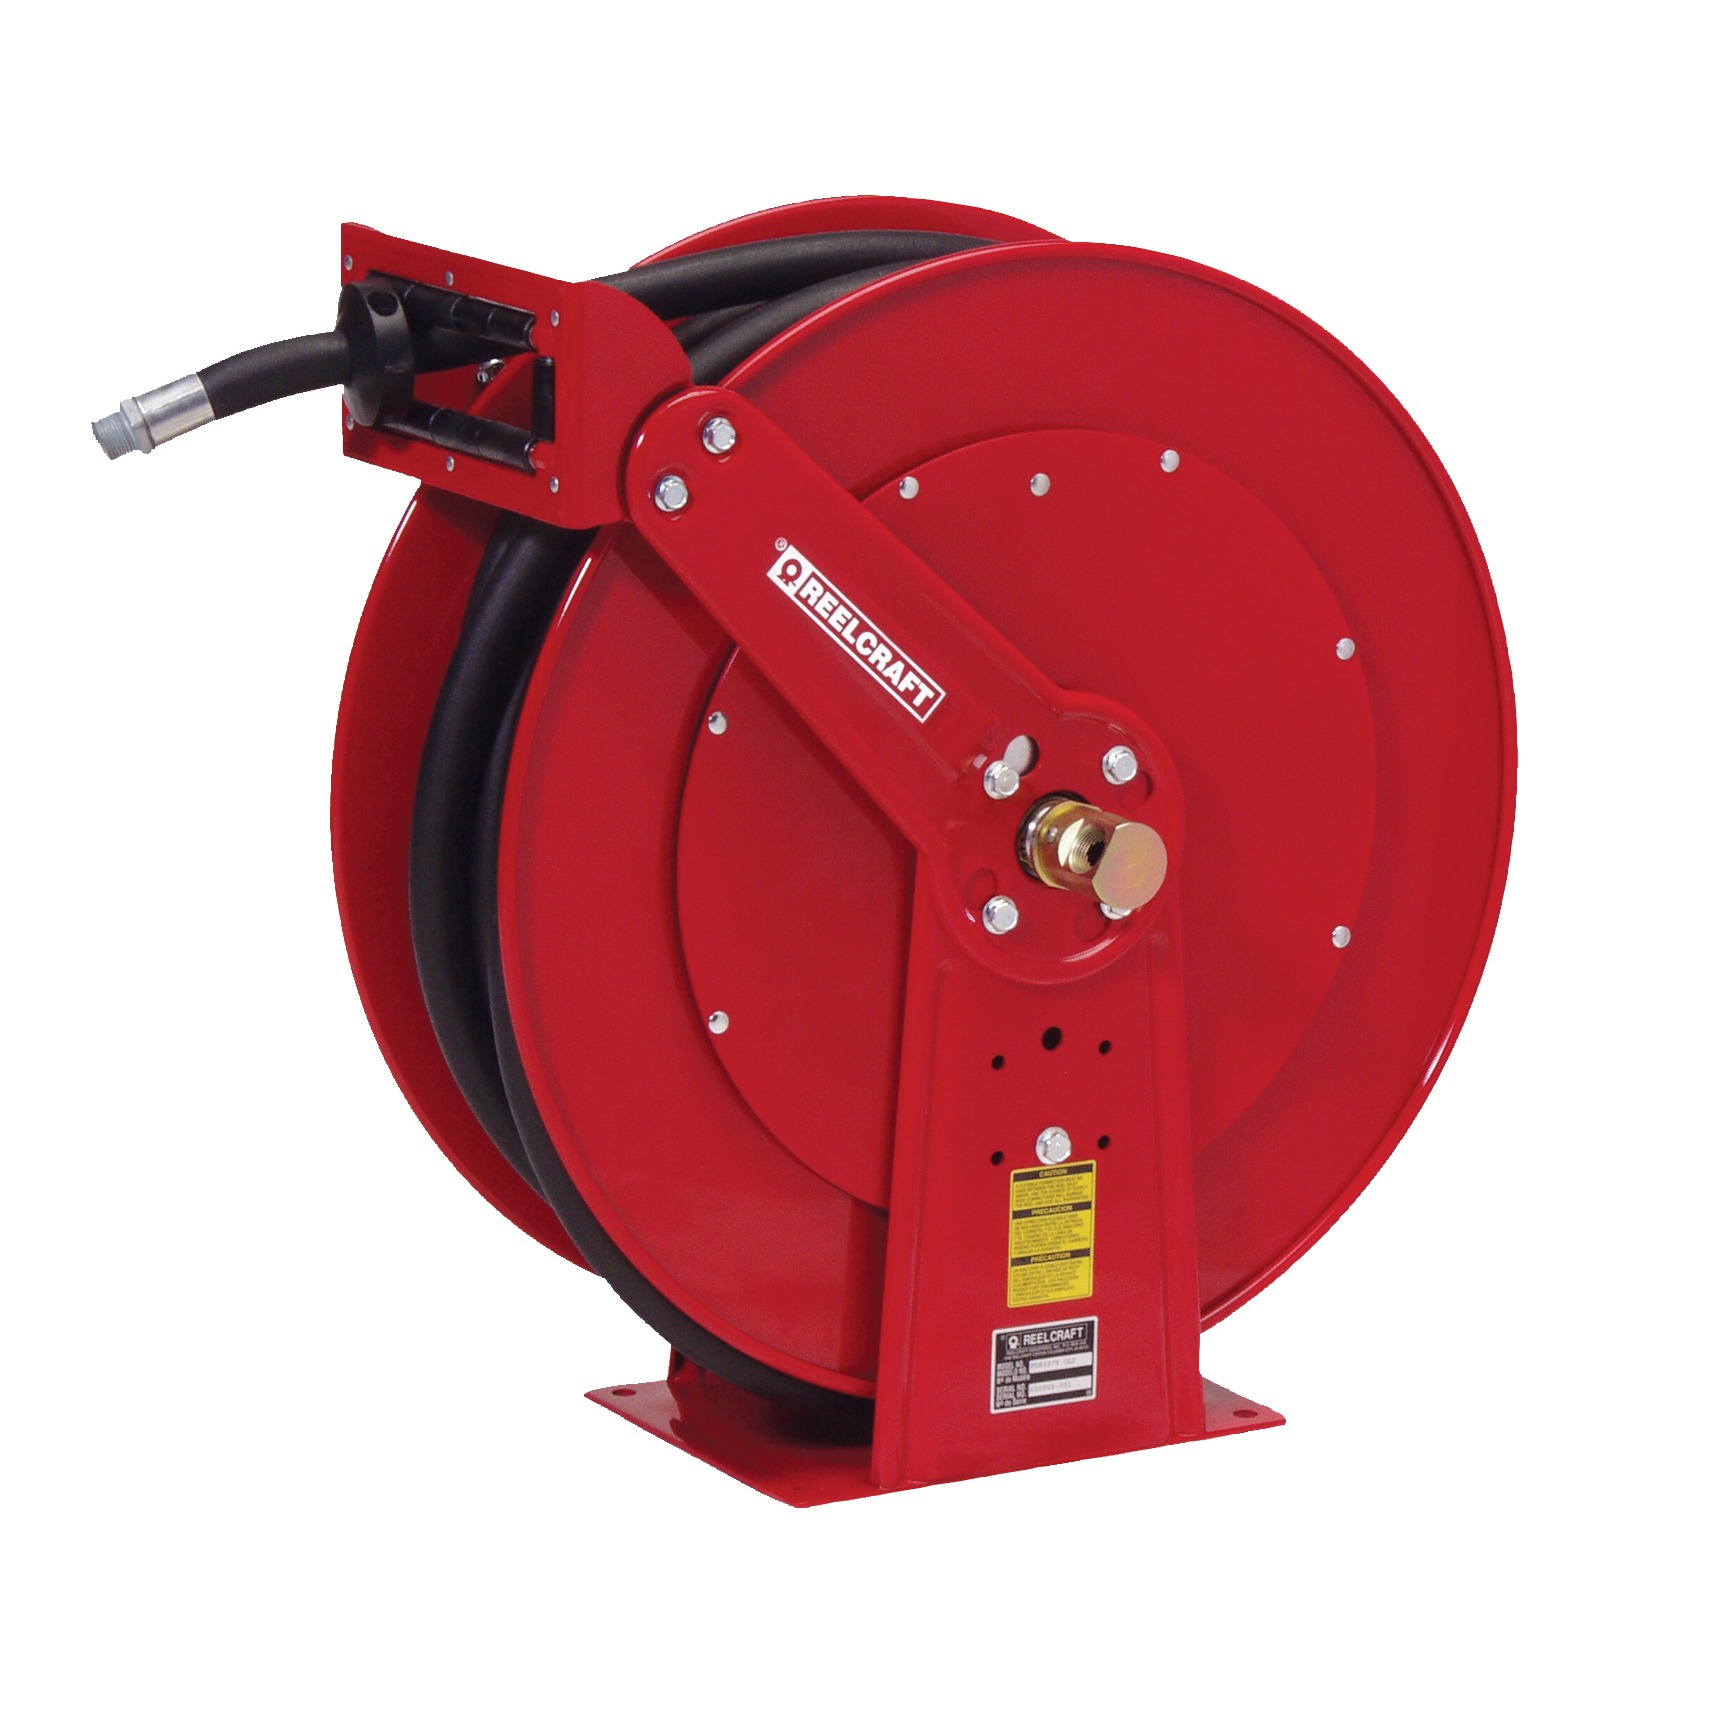 Diesel and Gas Hose Reels - Hose, Cord and Cable Reels - Reelcraft